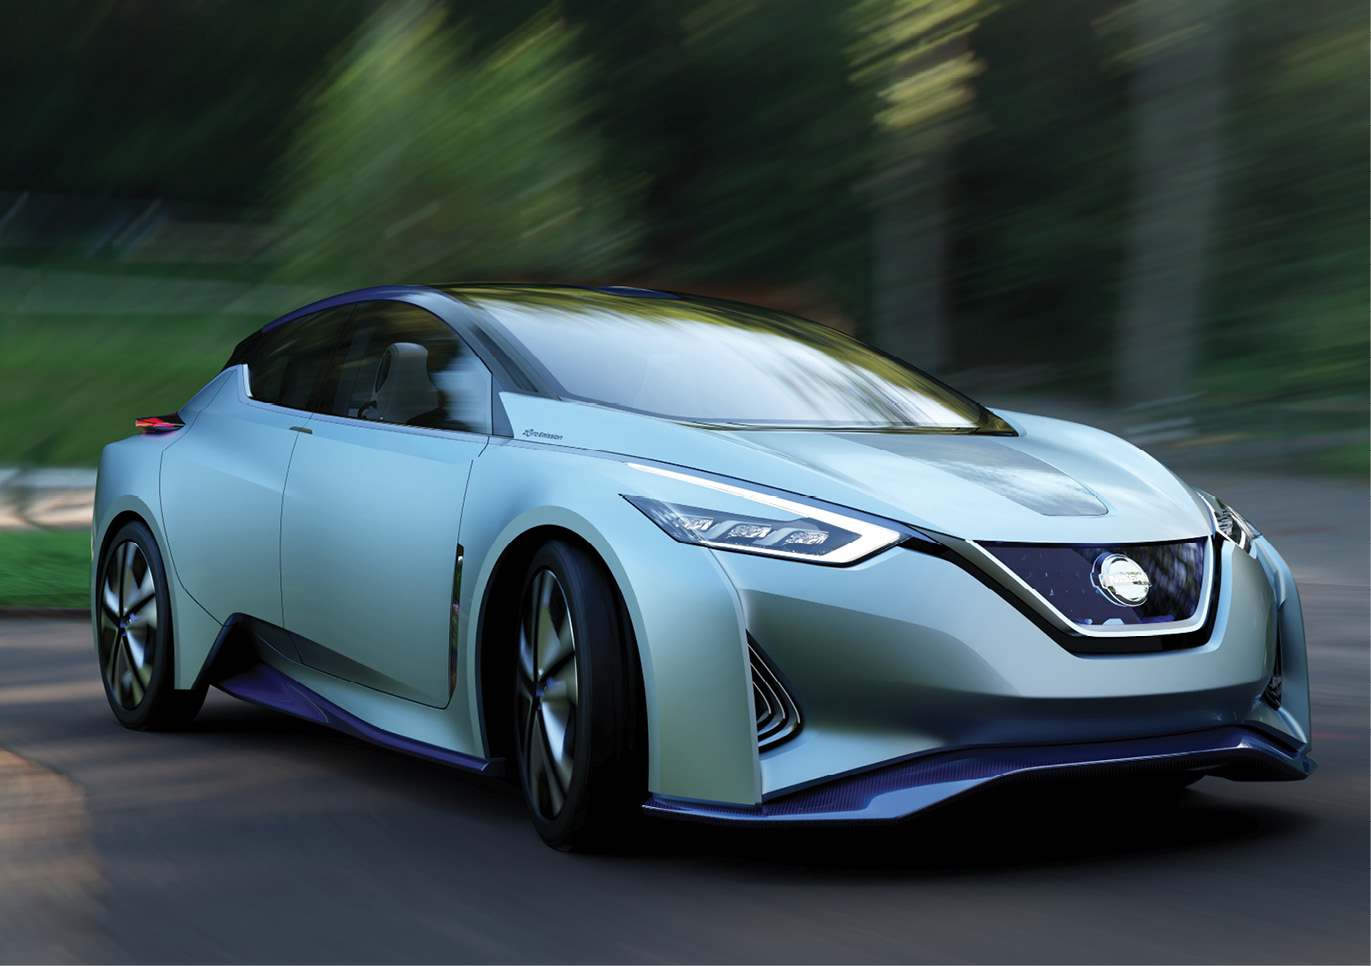 Nissan is integrating advanced vehicle control & safety technologies with AI to develop practical, real-world applications of autonomous drive technology.